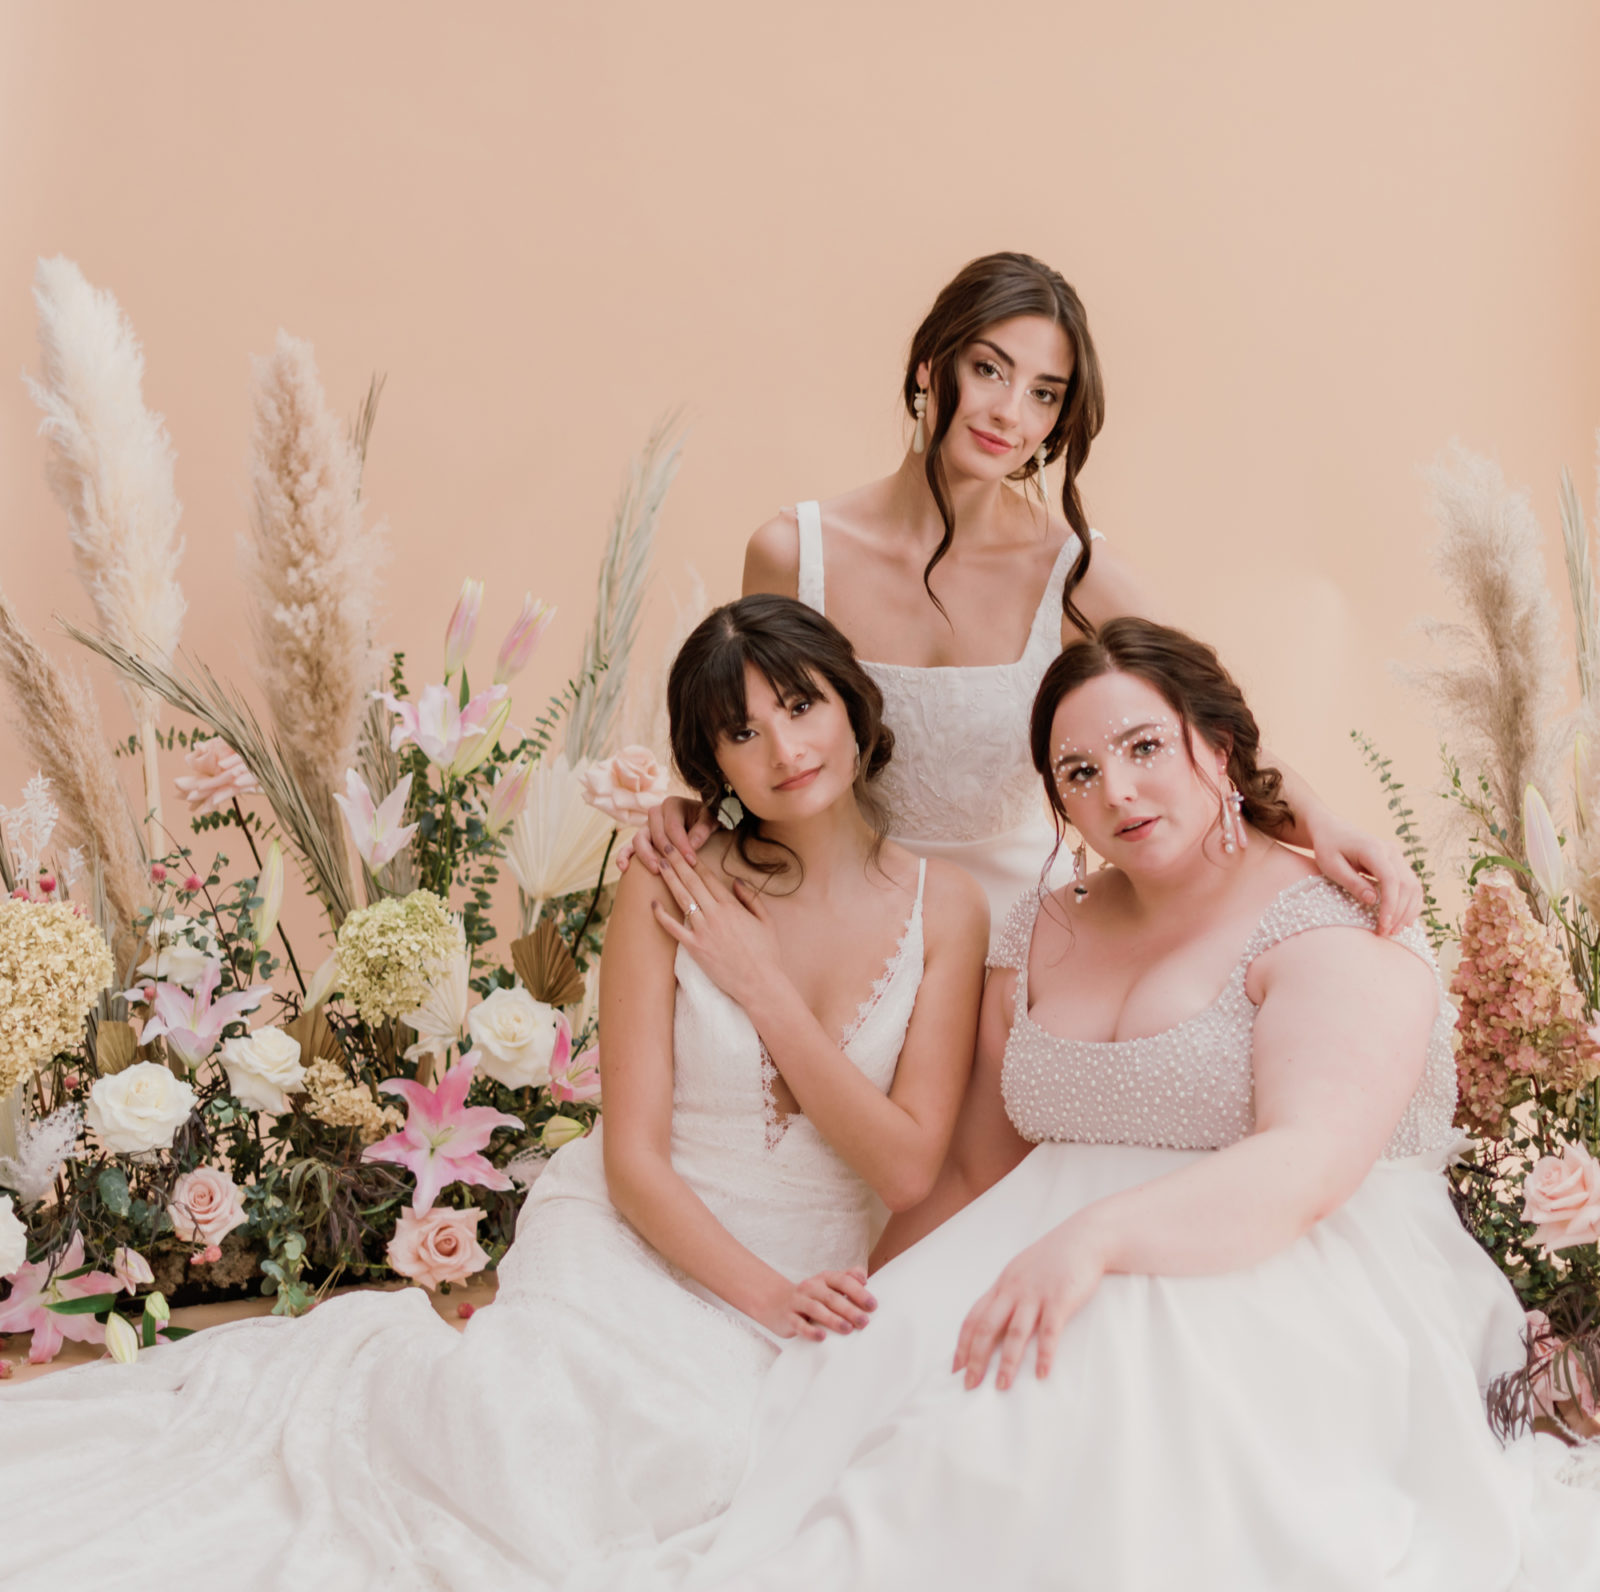 Three models pose together showcasing Lovenote Bride's newest wedding dress collection